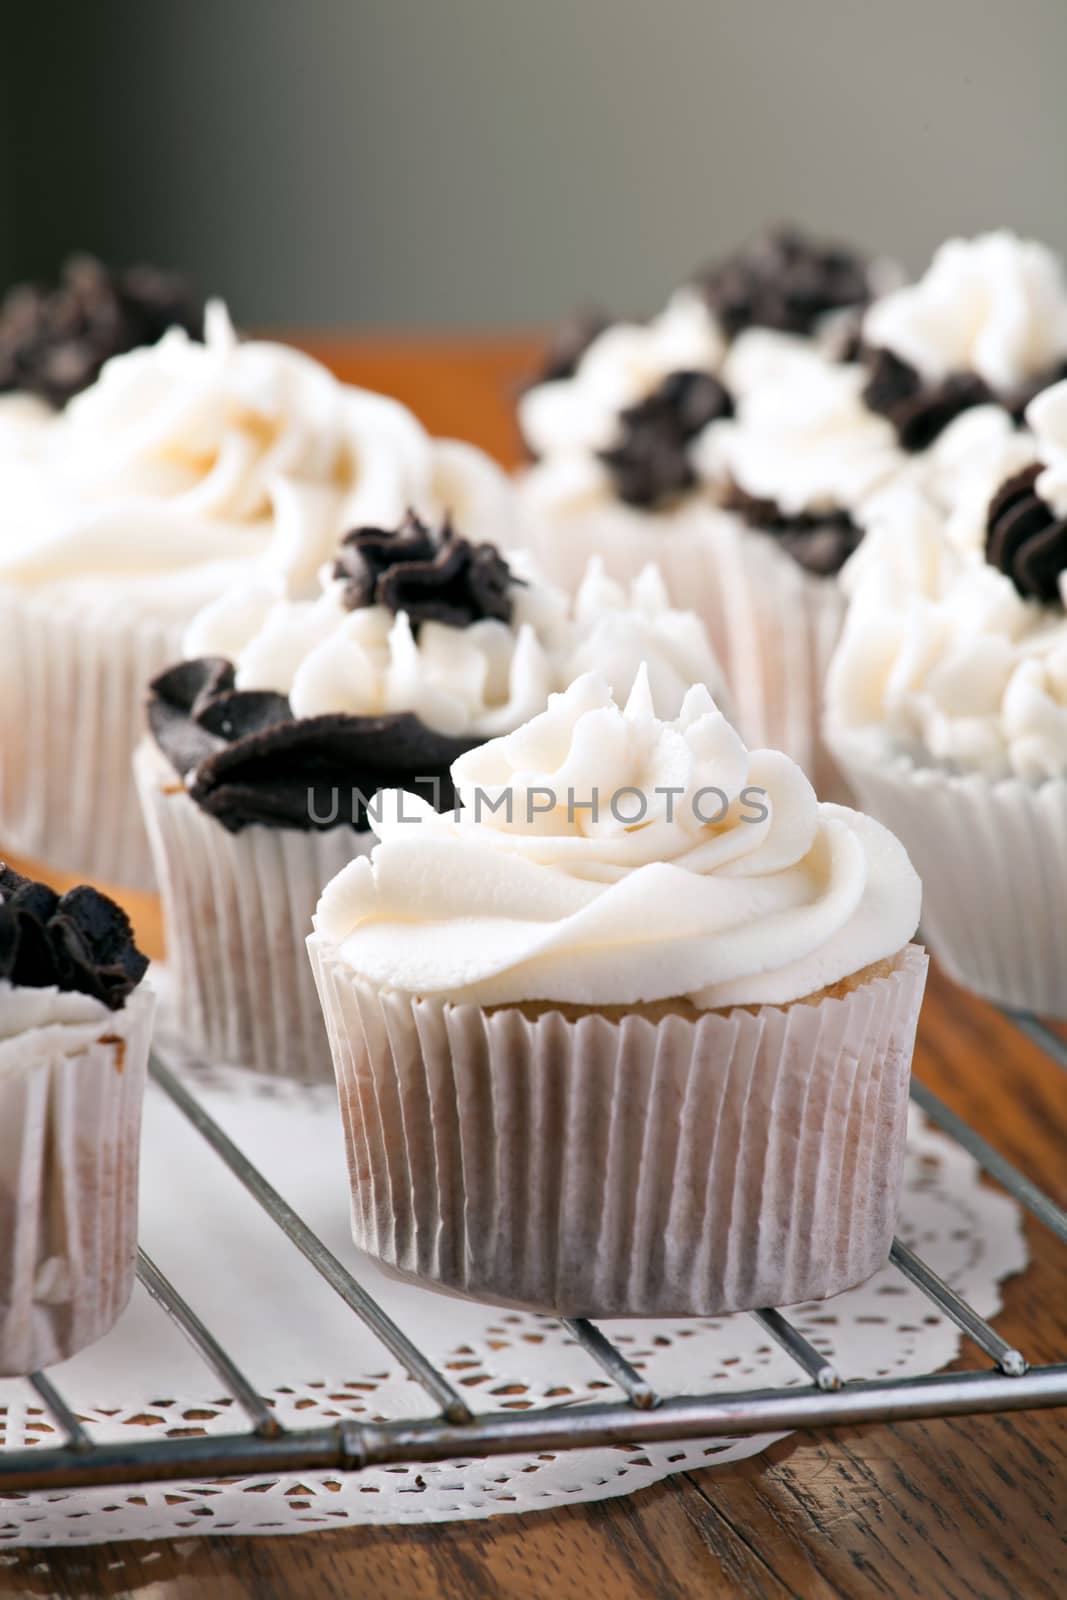 Close up of some decadent gourmet cupcakes with chocolate and vanilla frosting. Shallow depth of field.